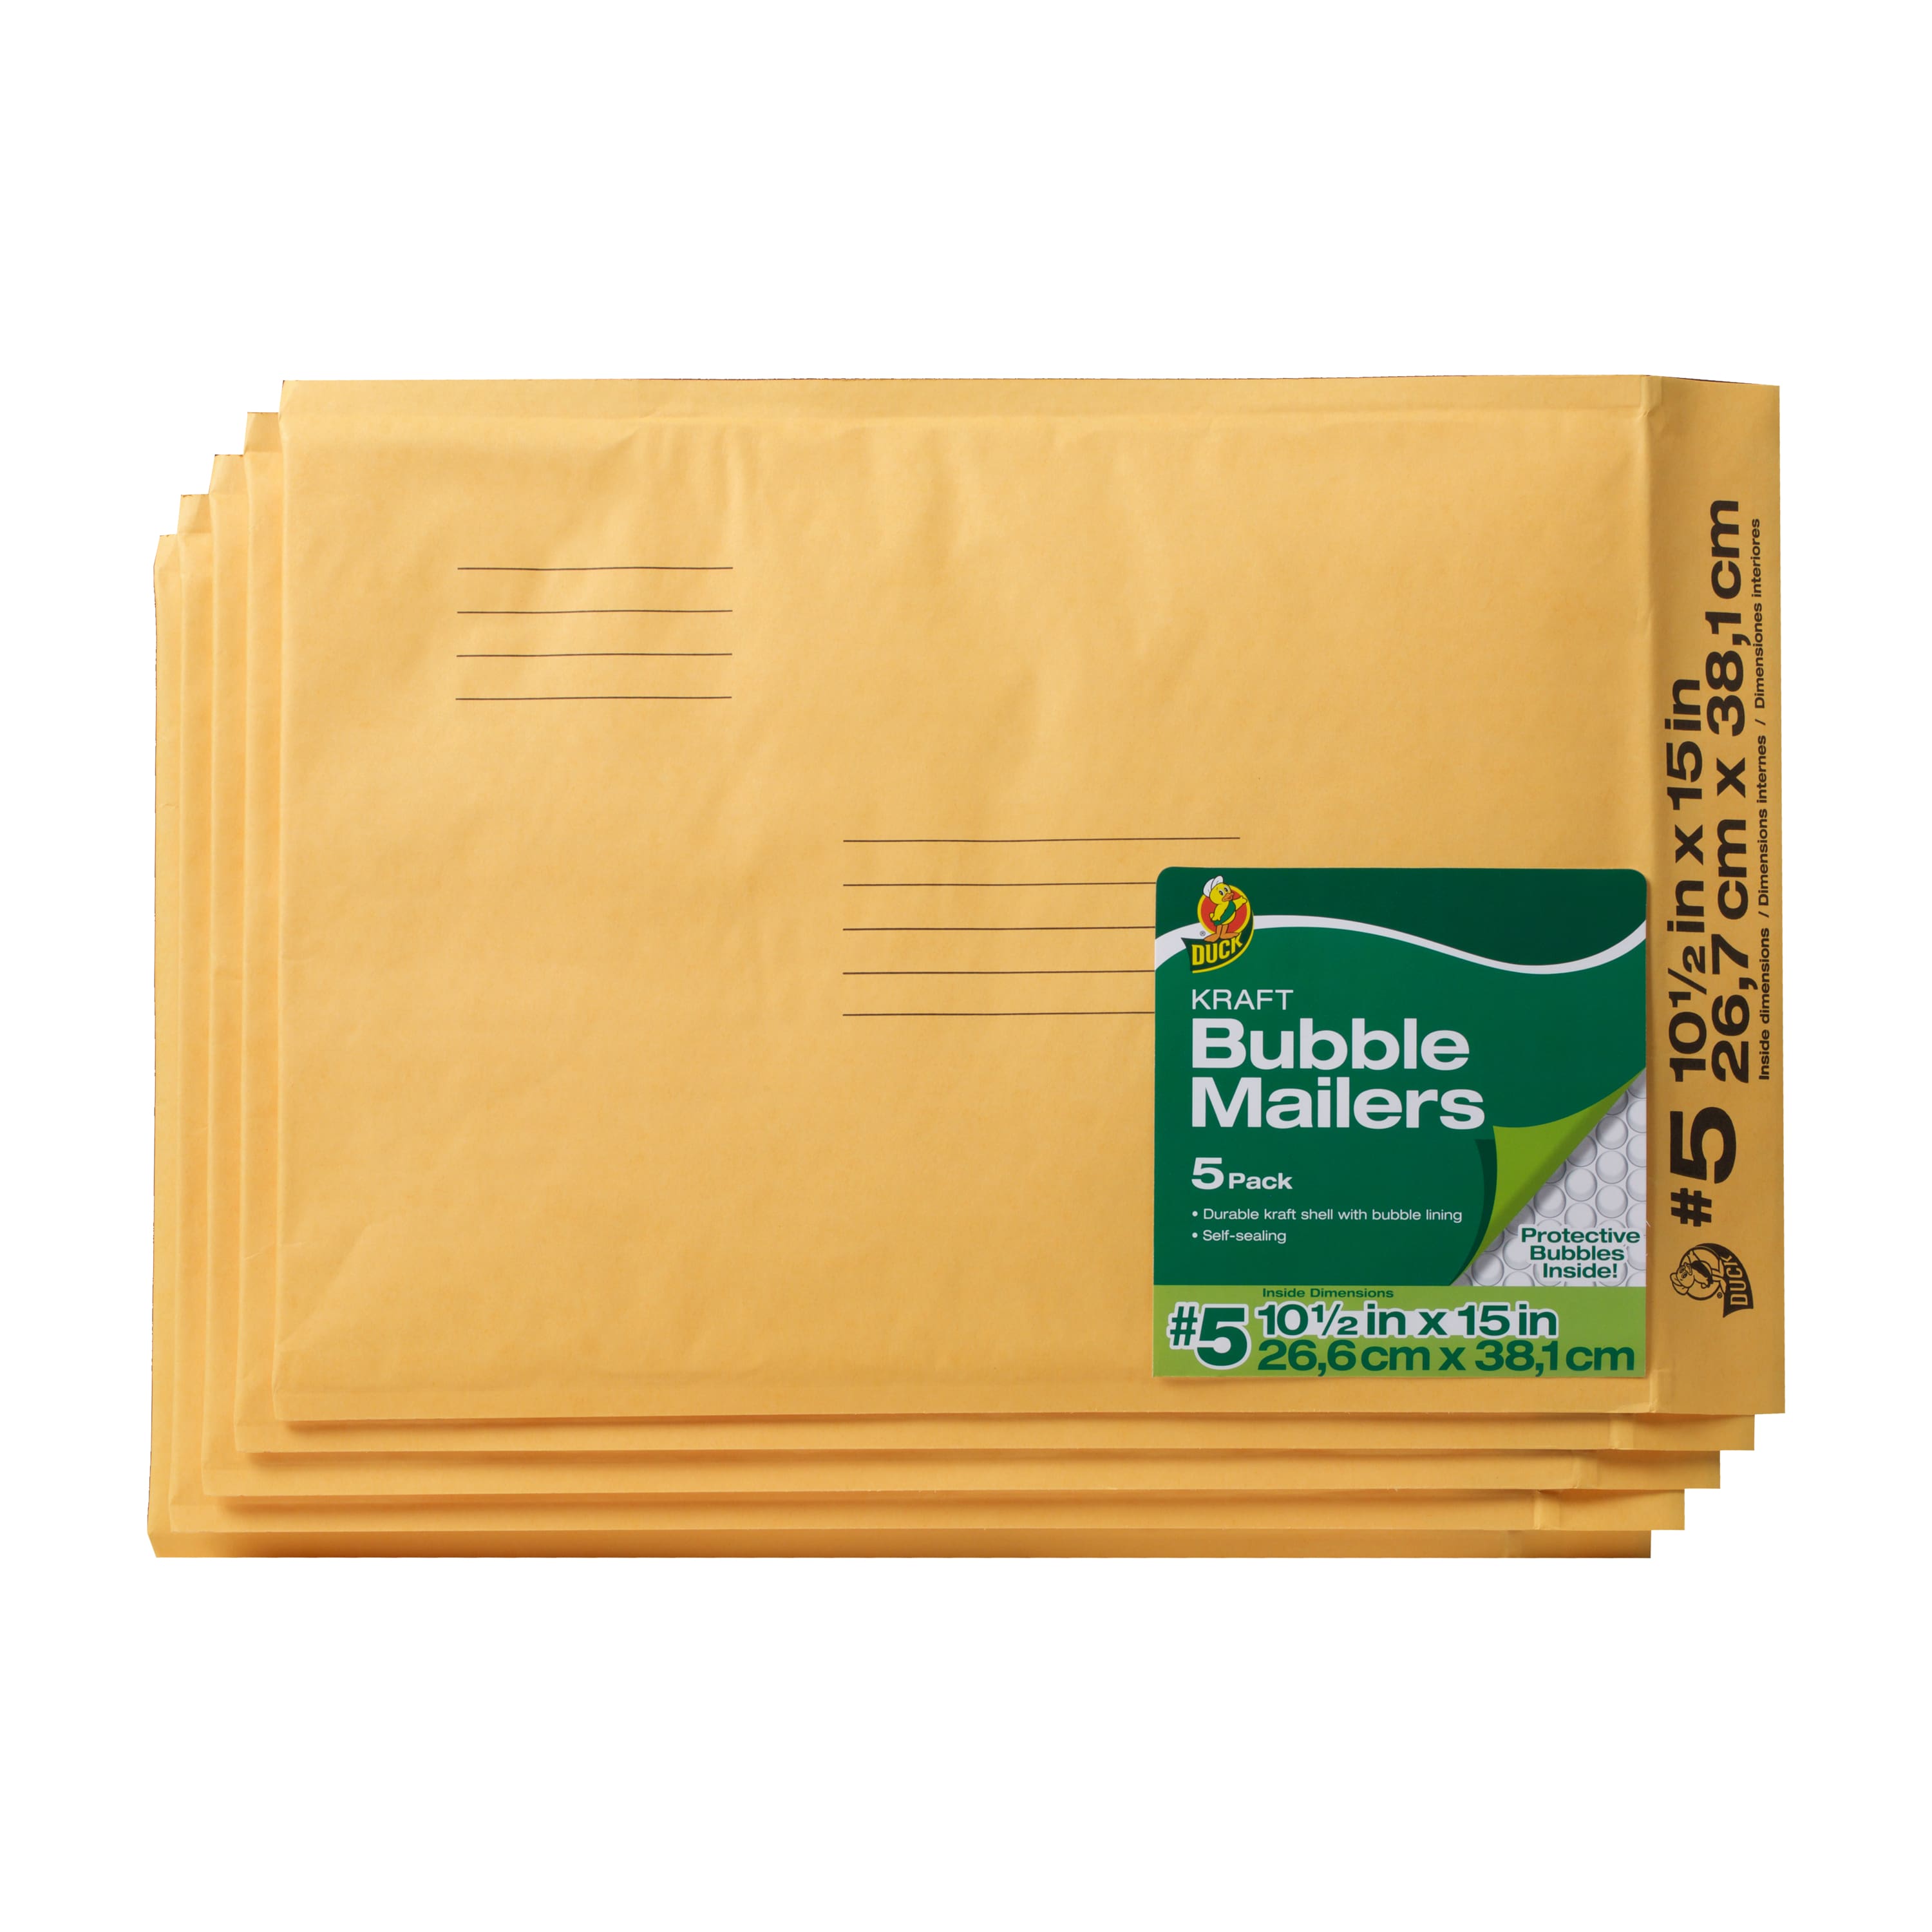 Heavy Duty Tear and Lightweight Padded Mailing Envelopes 50 Pack Acrux7 6 x 10 Kraft Bubble Mailers Bubble Mailers Self Seal Padded Envelopes with Peel-N-Seal